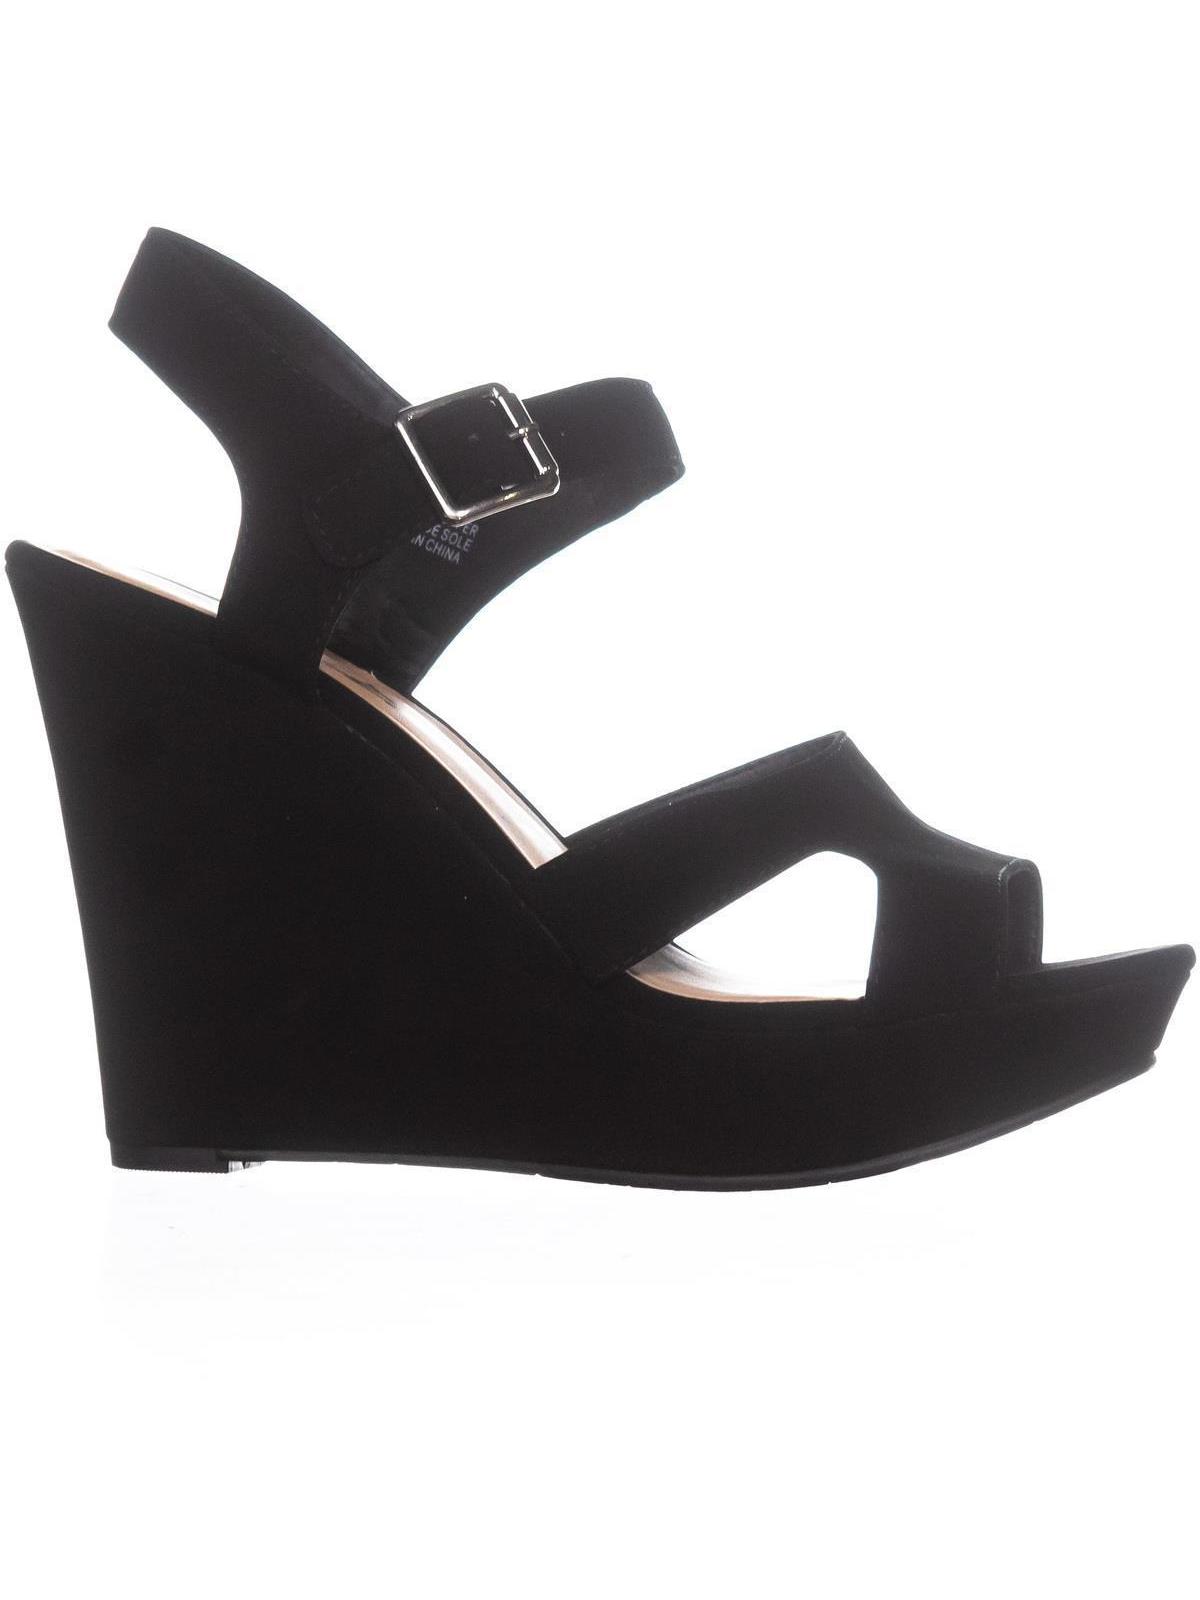 Womens AR35 Rochelle Ankle Strap Wedge Sandals, Black - image 4 of 5